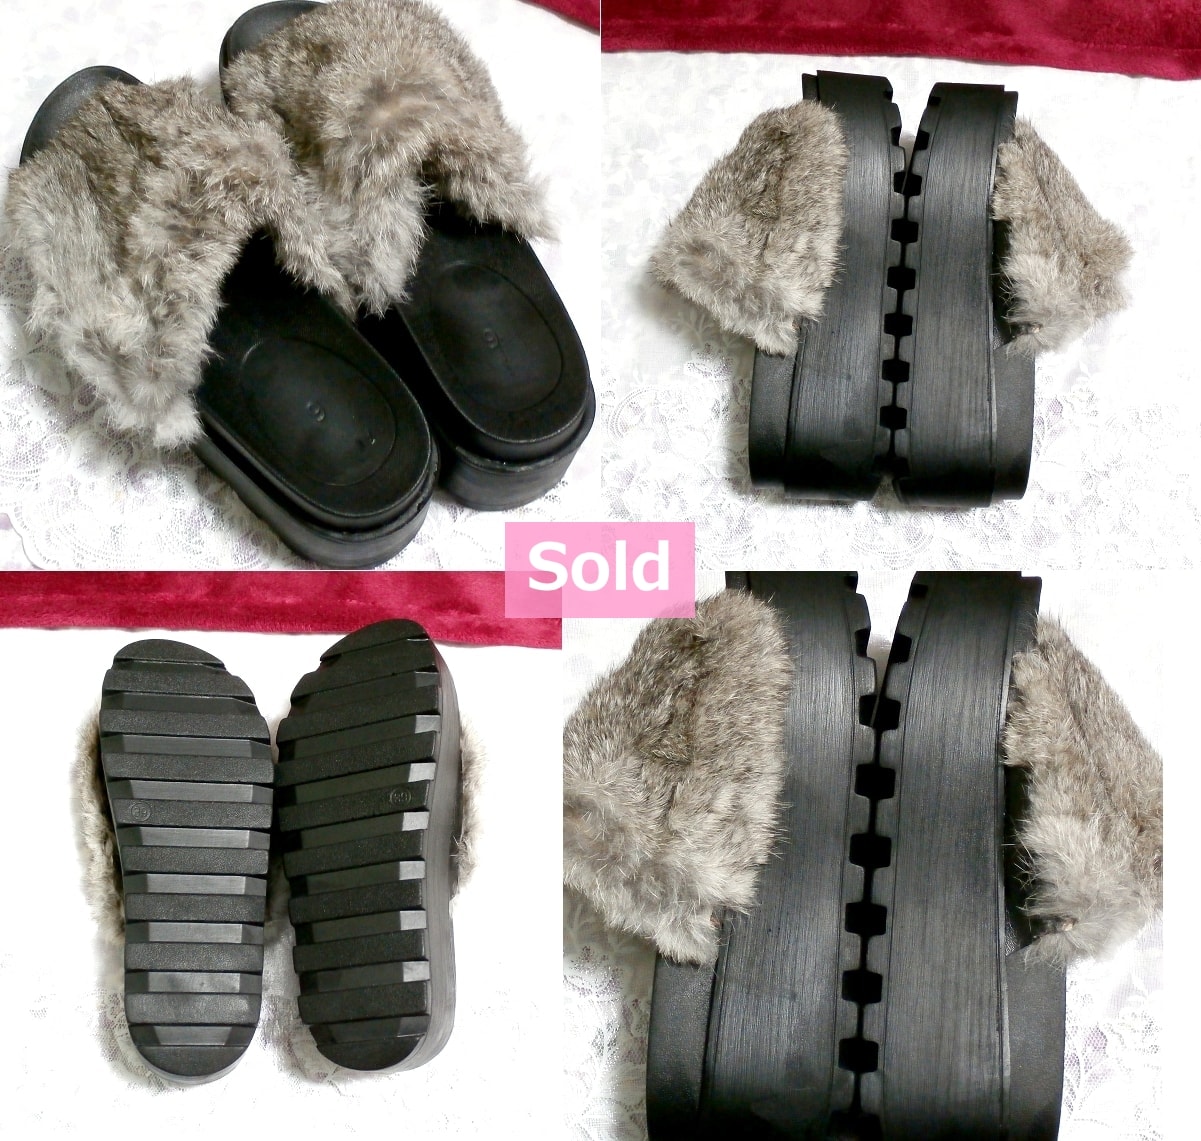 Gray fur thick bottom women's shoes / sandals also for gray fur thick bottom women's shoes / sandals